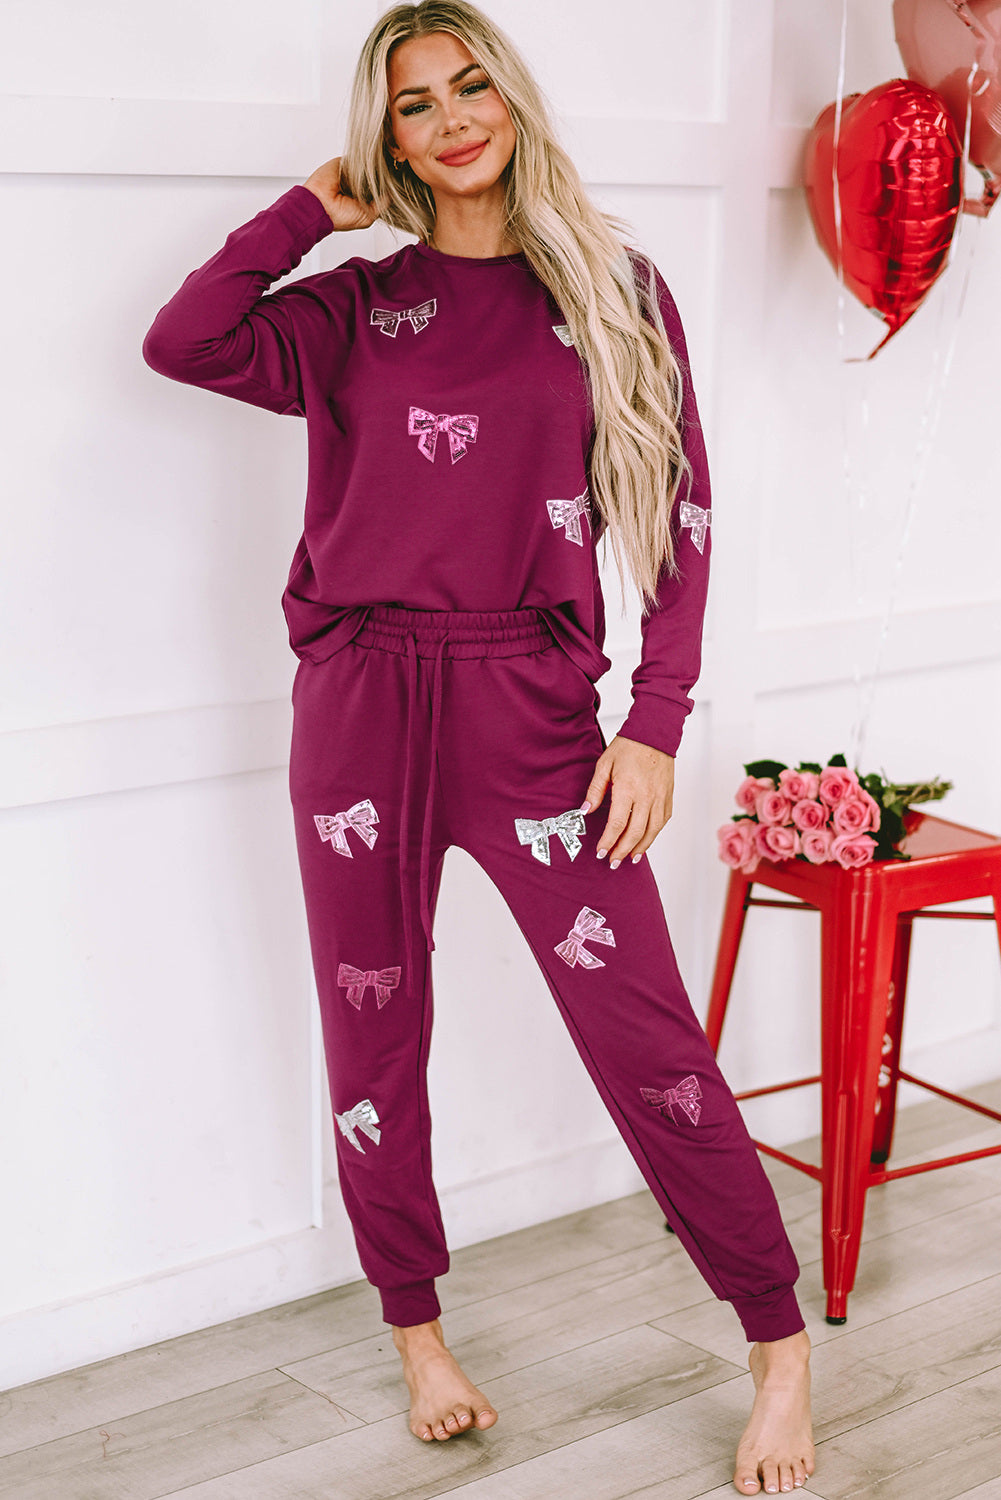 LC15800-3-S, LC15800-3-M, LC15800-3-L, LC15800-3-XL, LC15800-3-2XL, Red Sequined Bowknot Graphic Long Two-piece Outfit